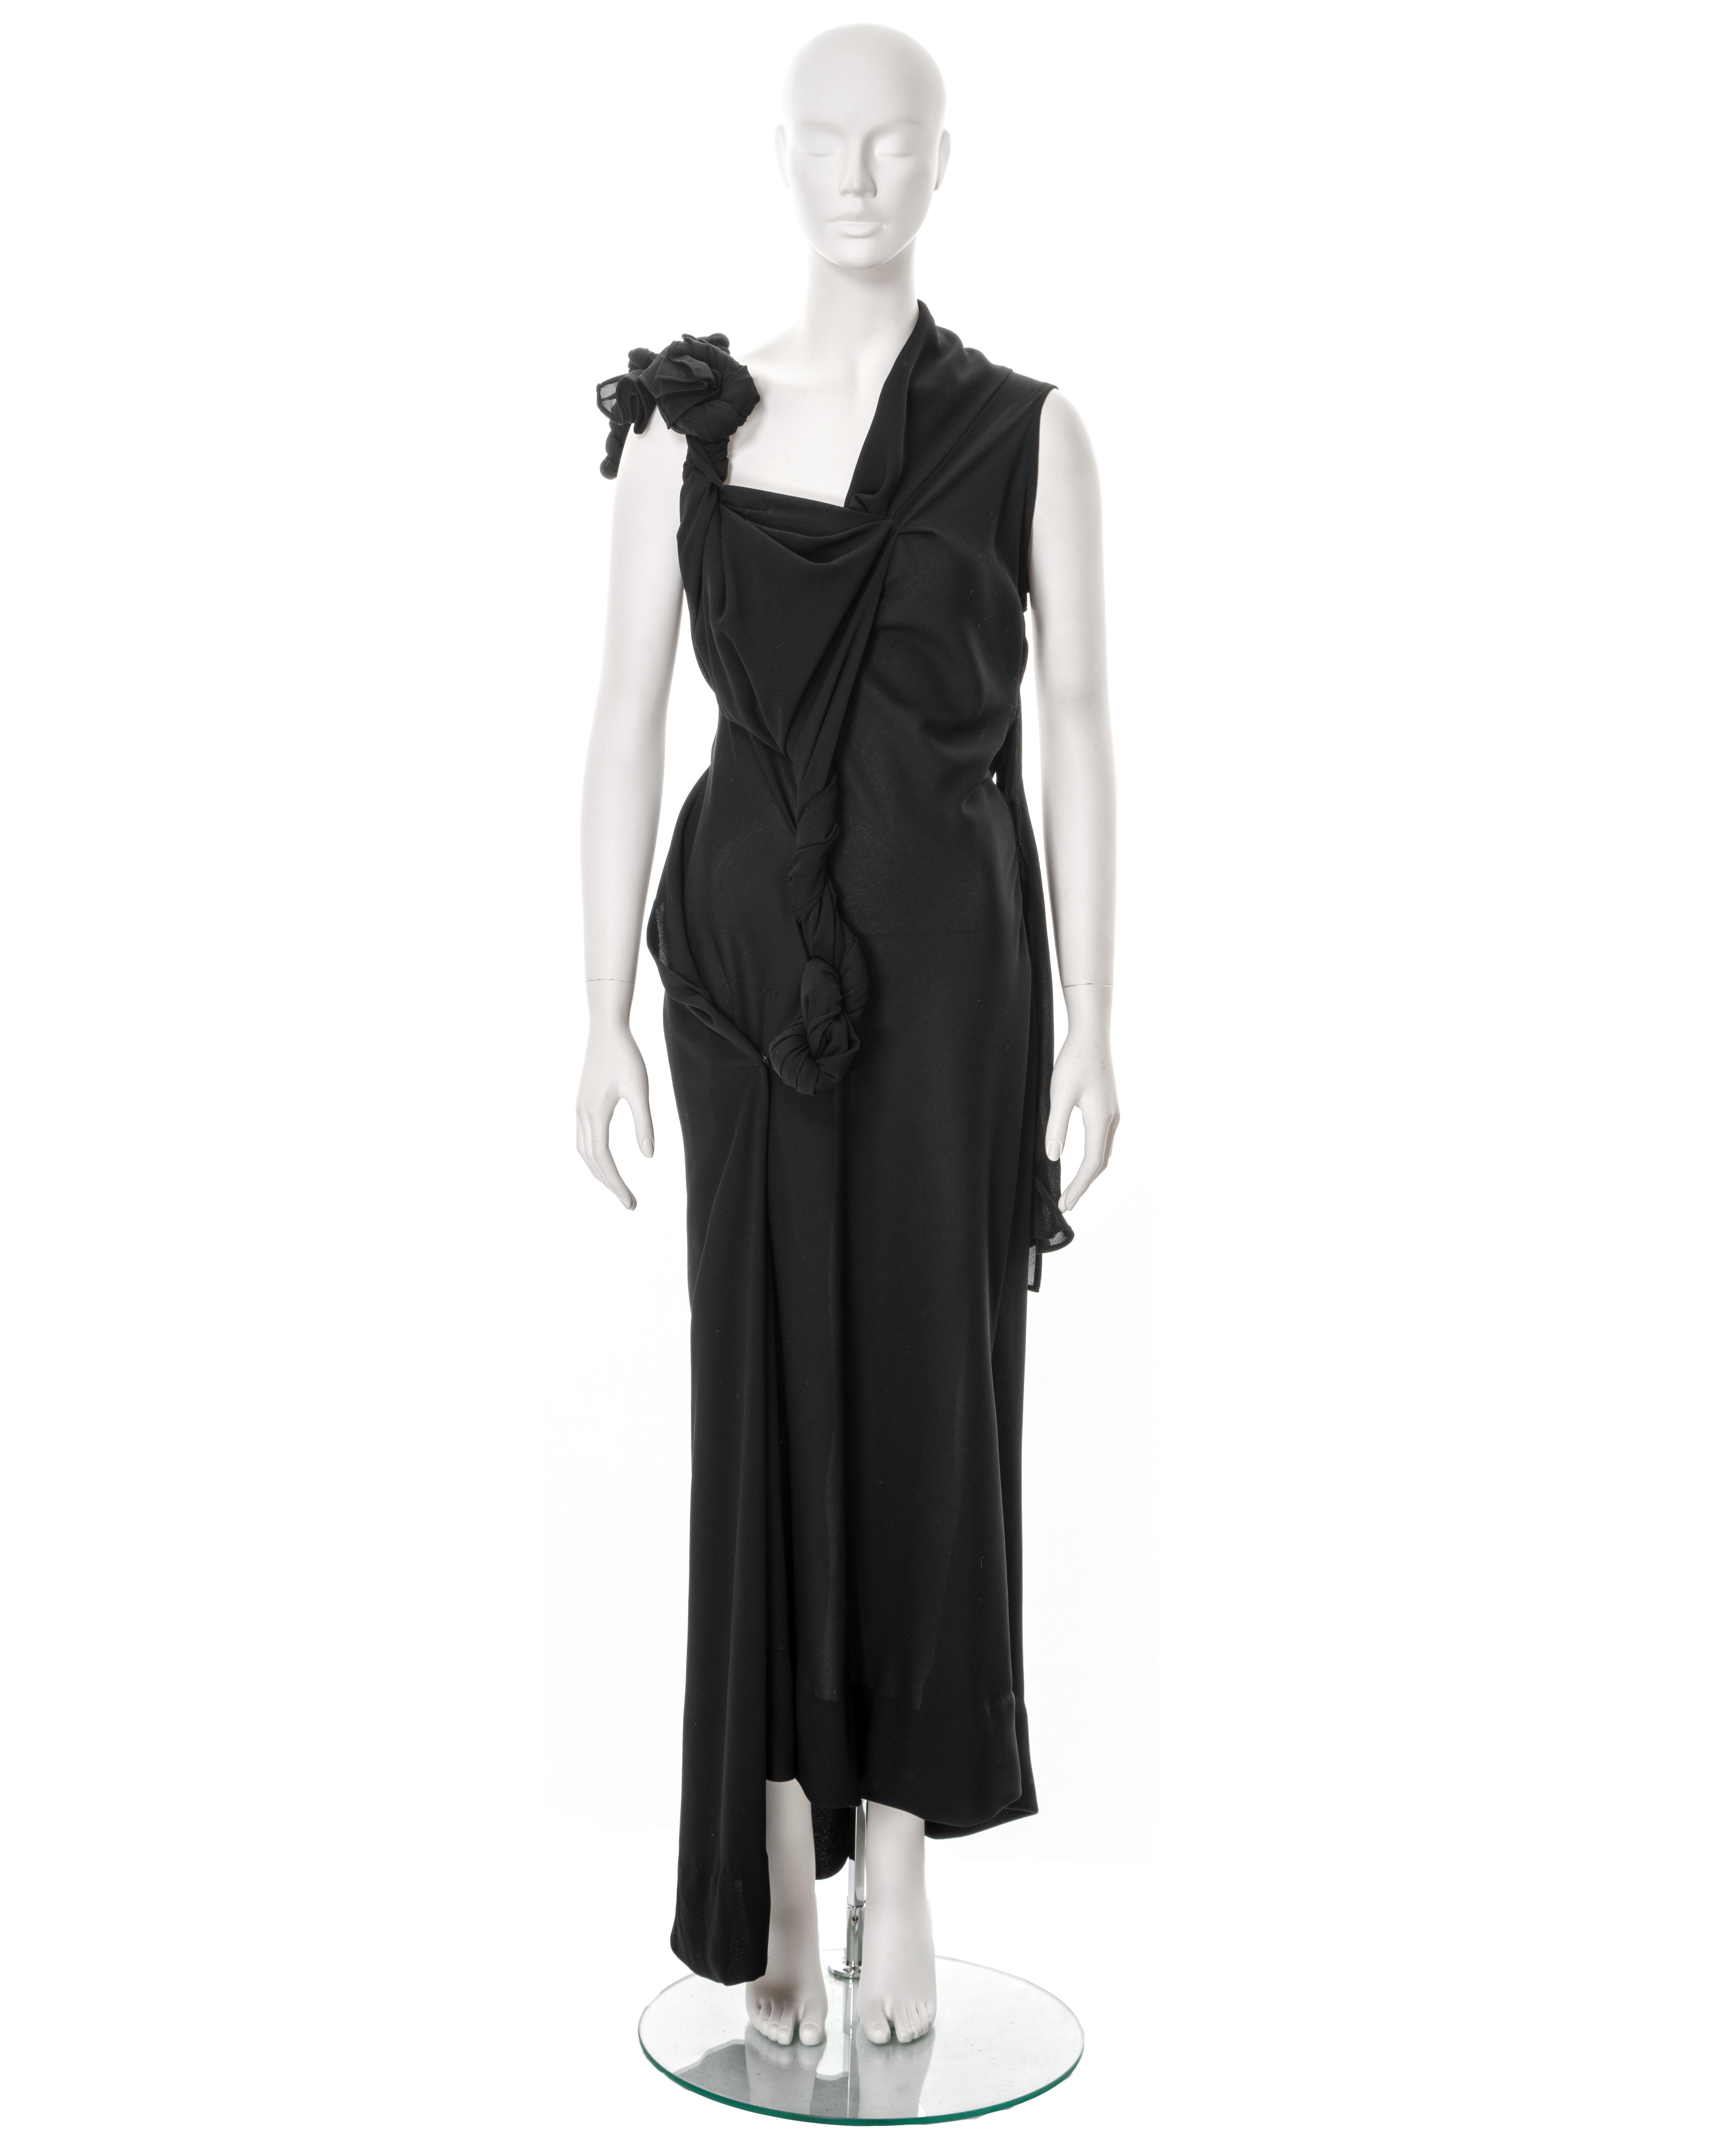 ▪ Yohji Yamamoto evening dress
▪ Sold by One of a Kind Archive
▪ Spring-Summer 1998
▪ Constructed from black polyester; twisted and draped around the bodice 
▪ Rare runway piece
▪ Size Small
▪ Made in Japan

All photographs in this listing EXCLUDING